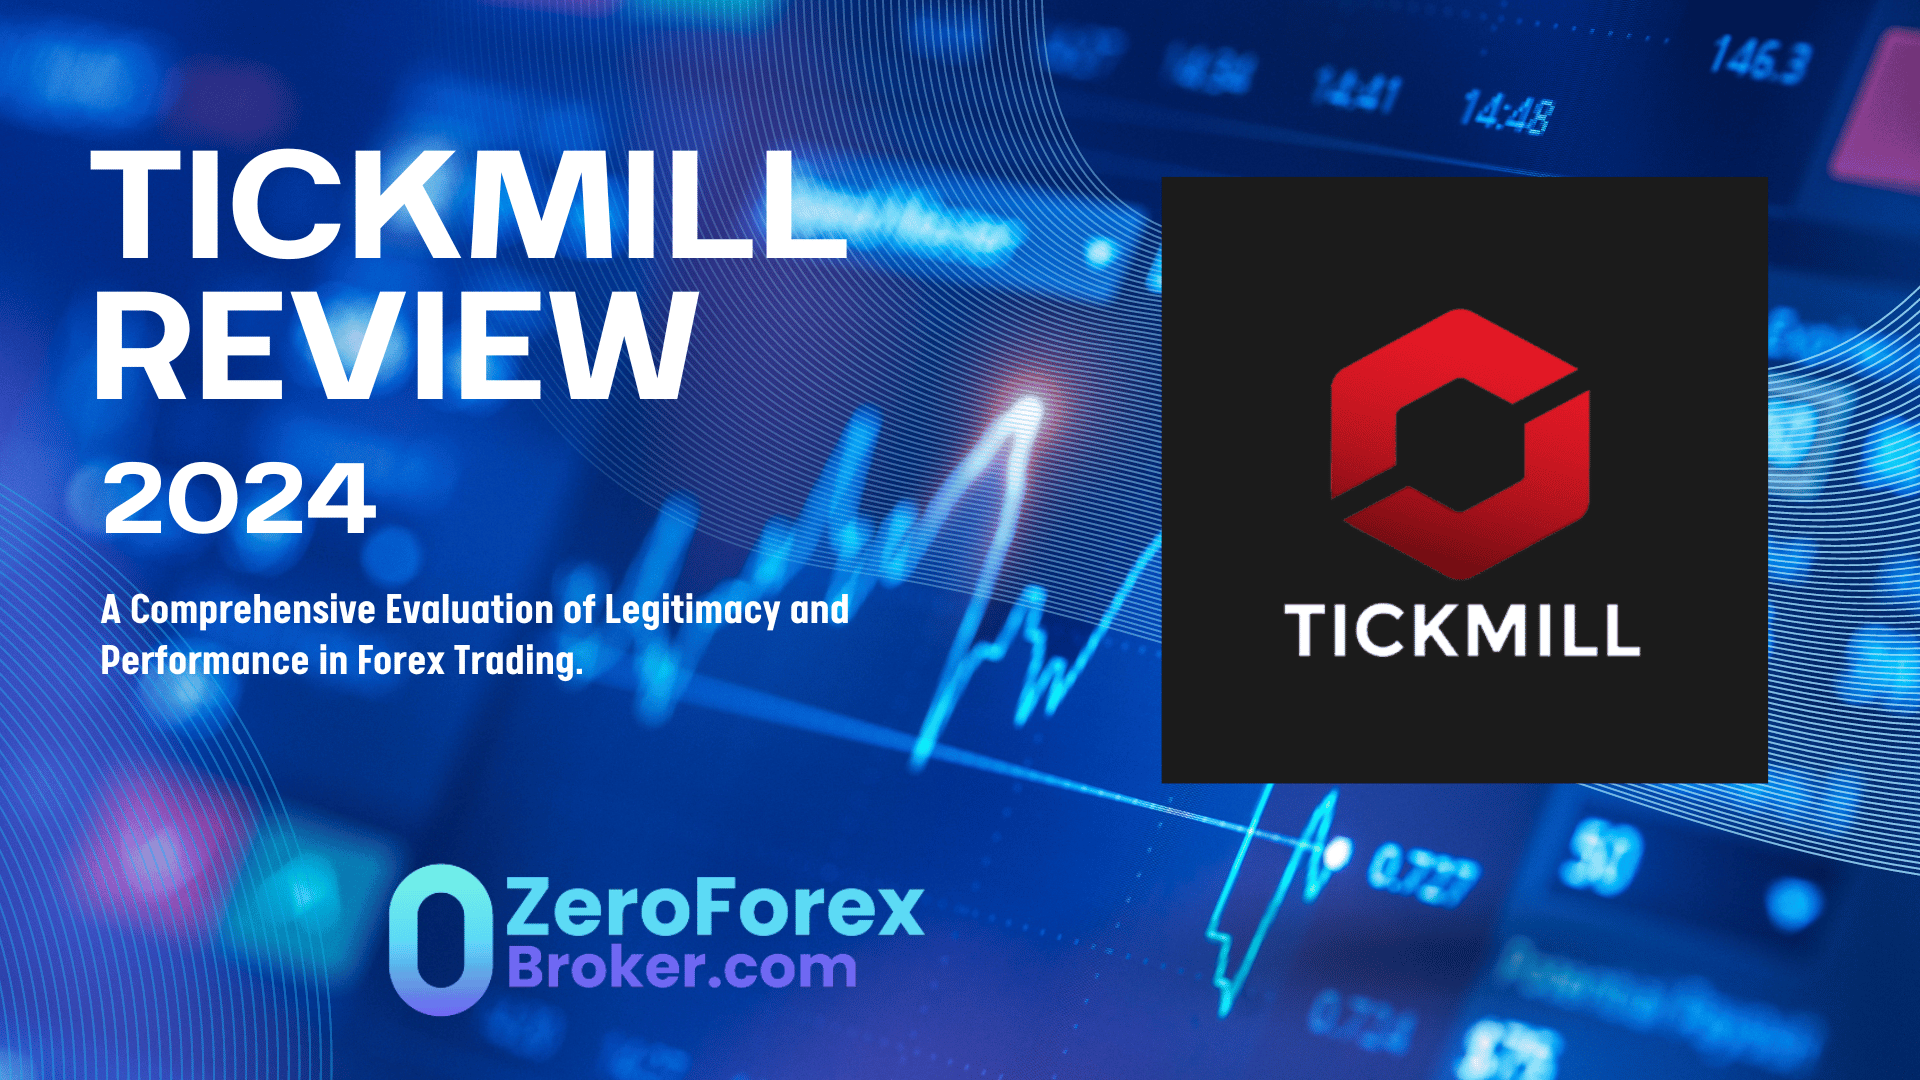 Tickmill Review 2024: A Comprehensive Analysis